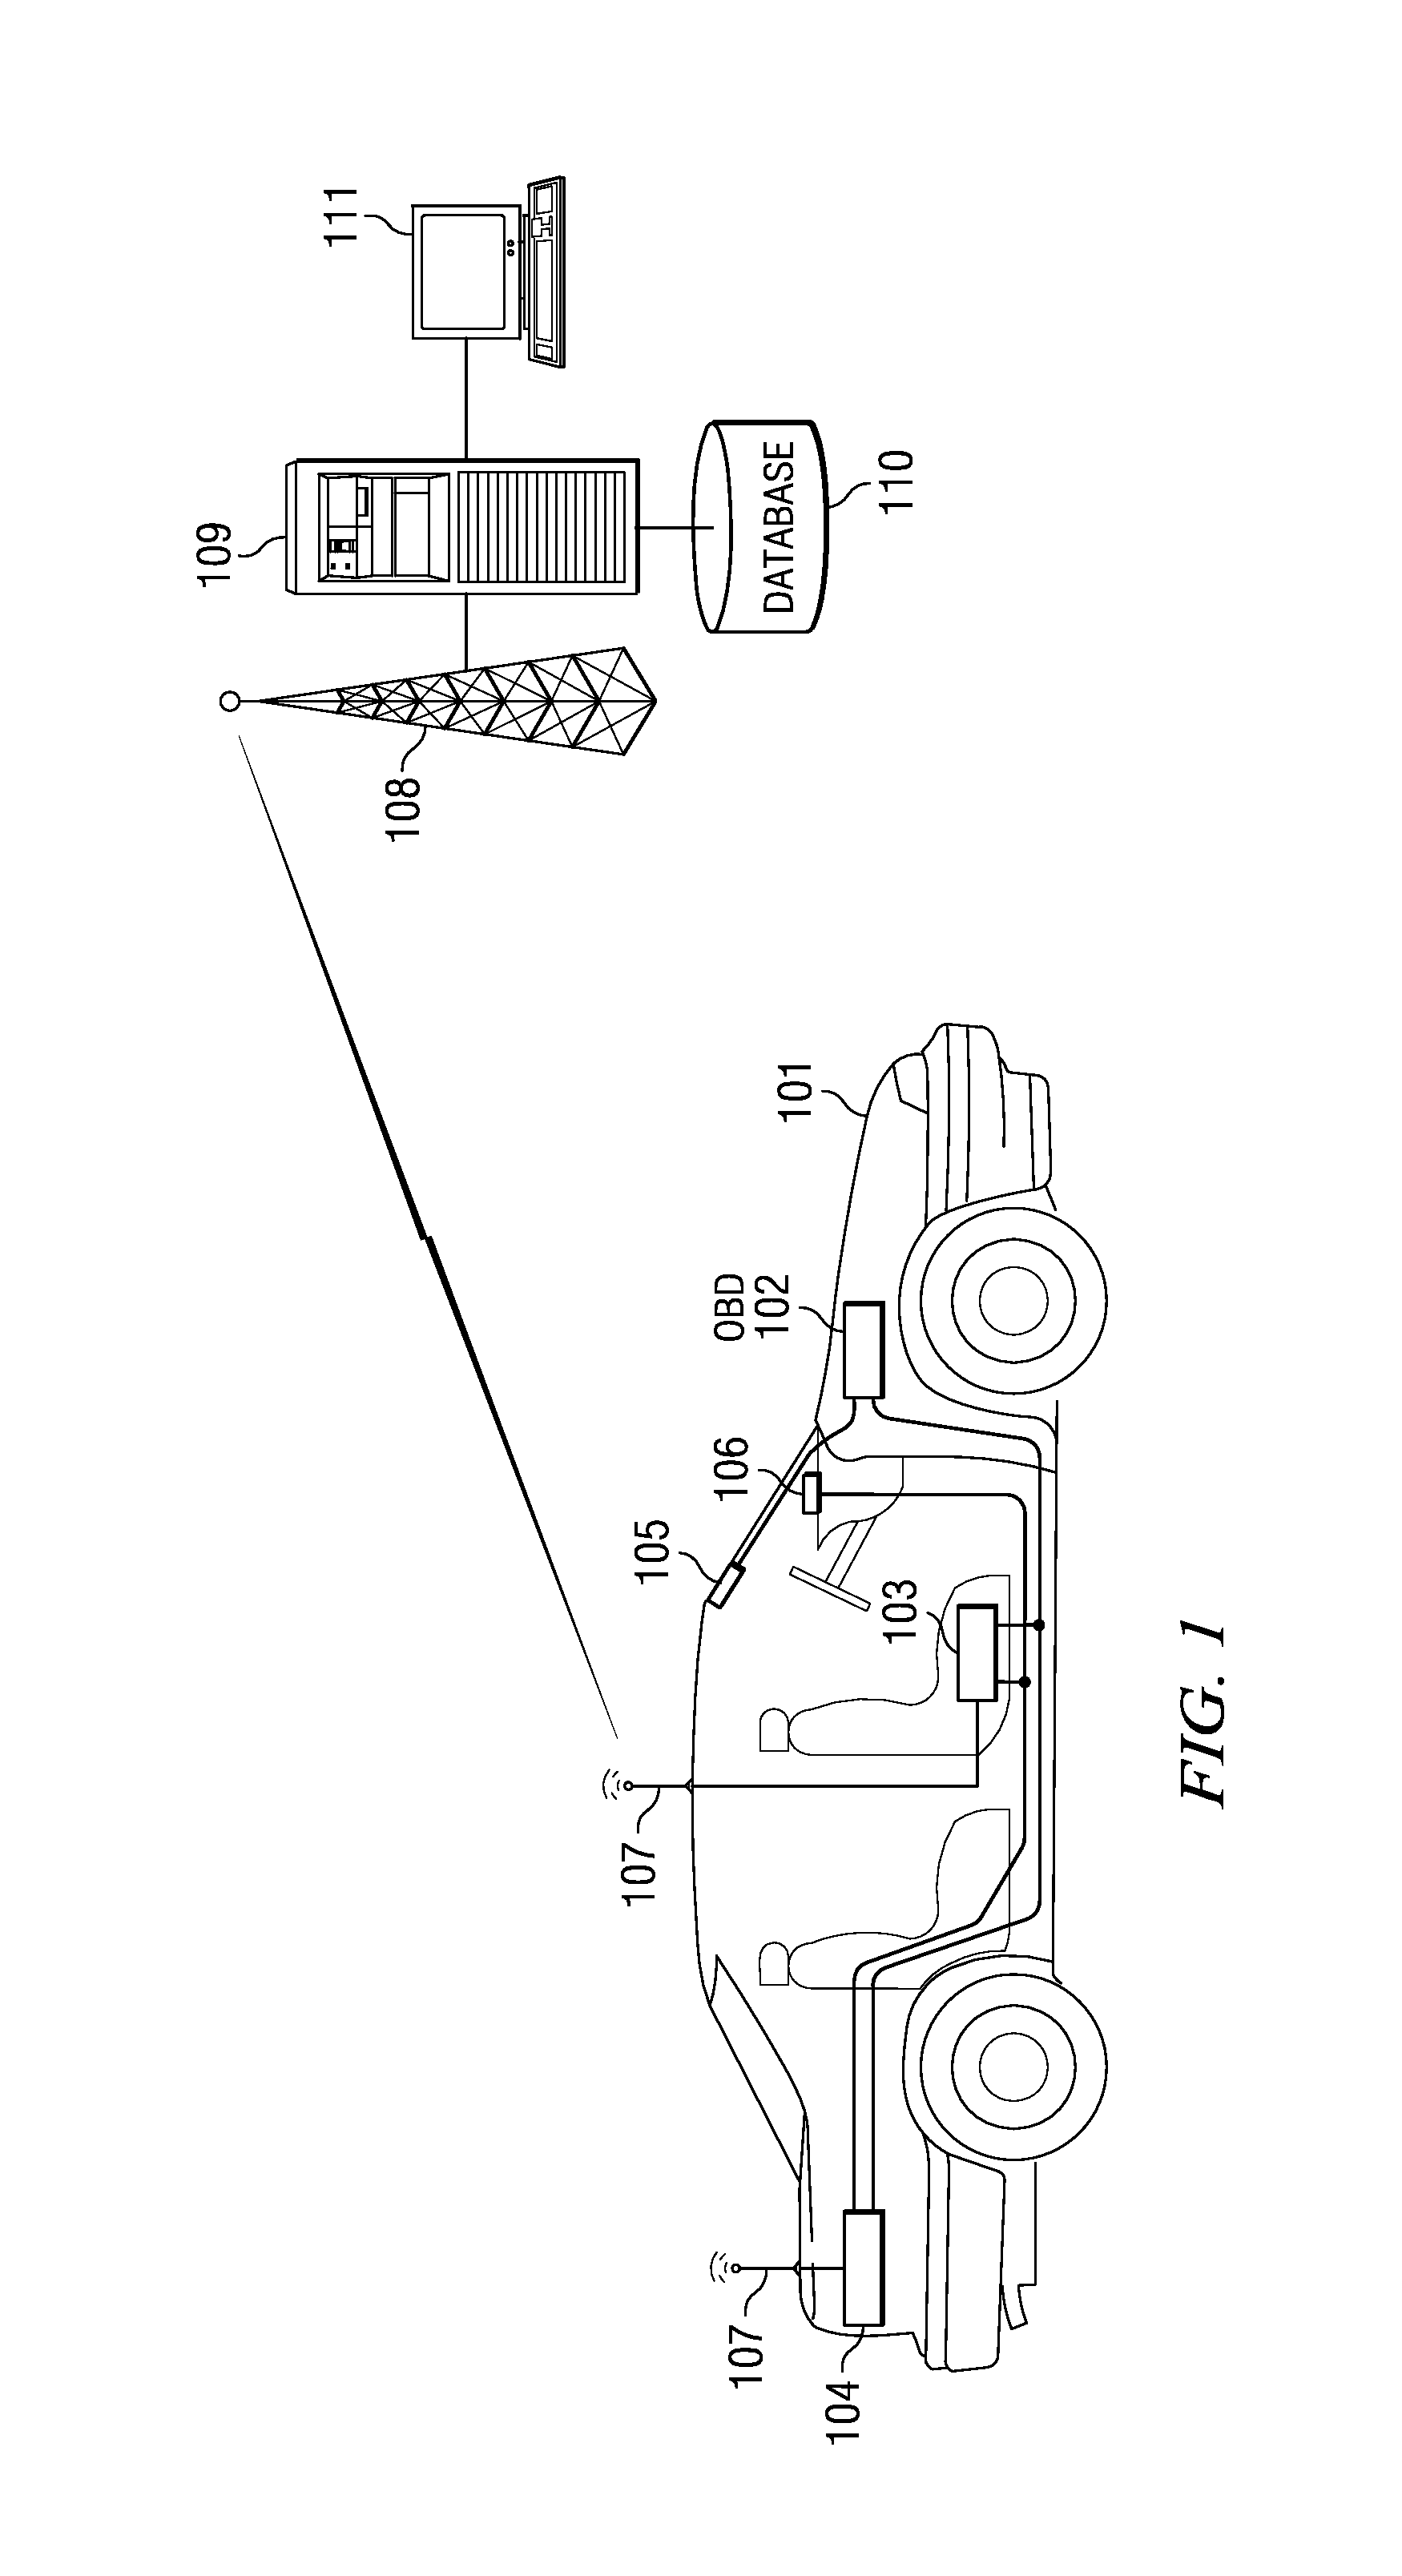 System and method for monitoring and improving driver behavior